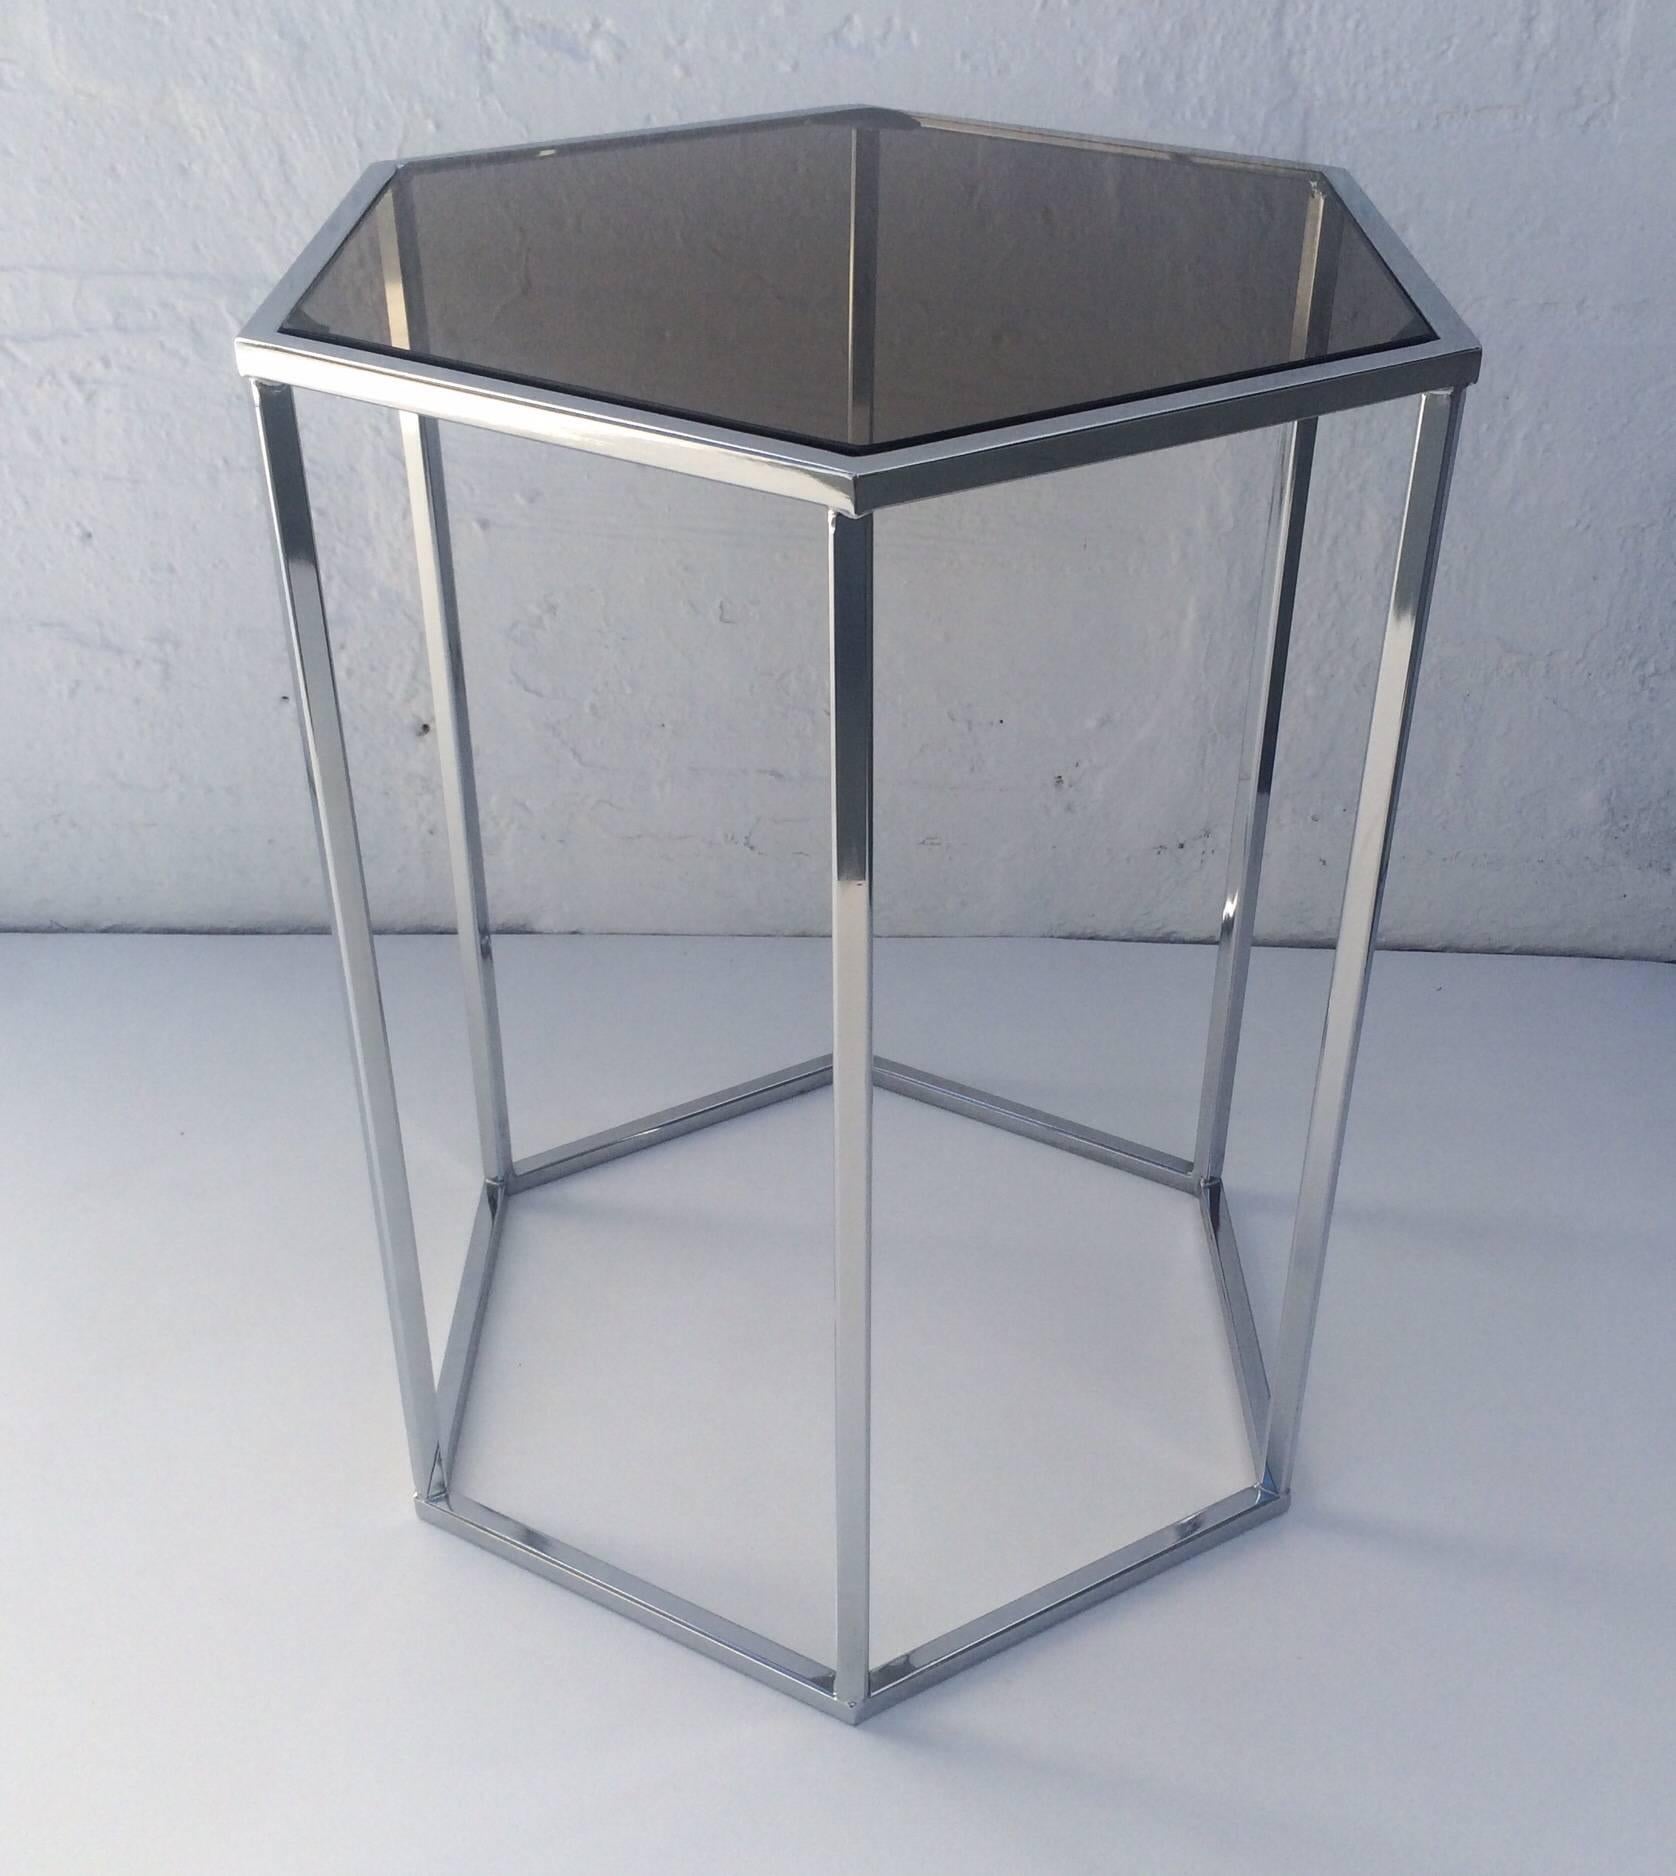 Hexagon side table designed by Milo Baughman, circa 1970s. 
Polished chrome hexagon base with a inset smoked glass top.